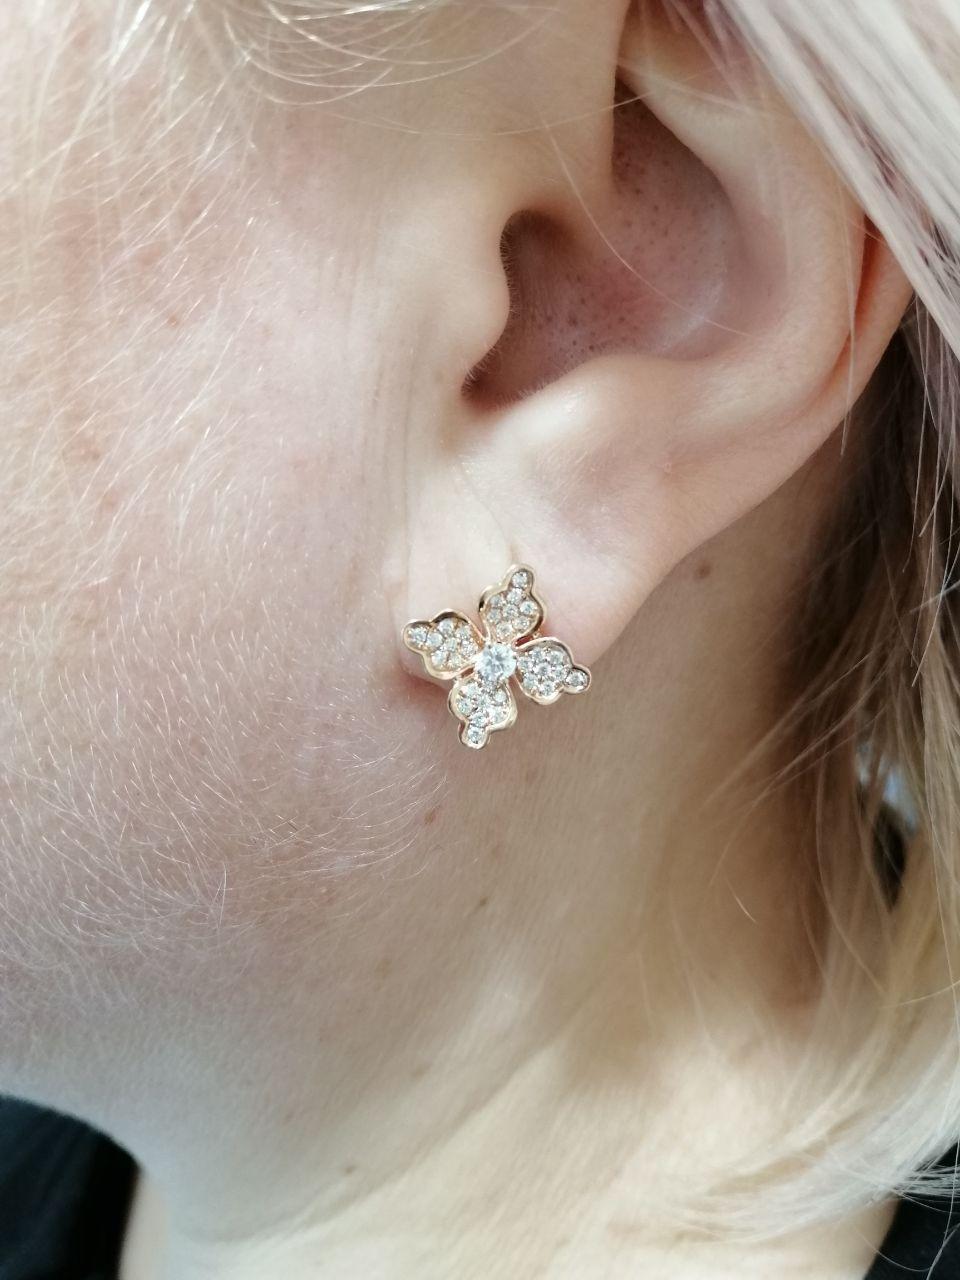 Feminine Elegant Yellow Gold White Diamond Flower Earrings In New Condition For Sale In Montreux, CH